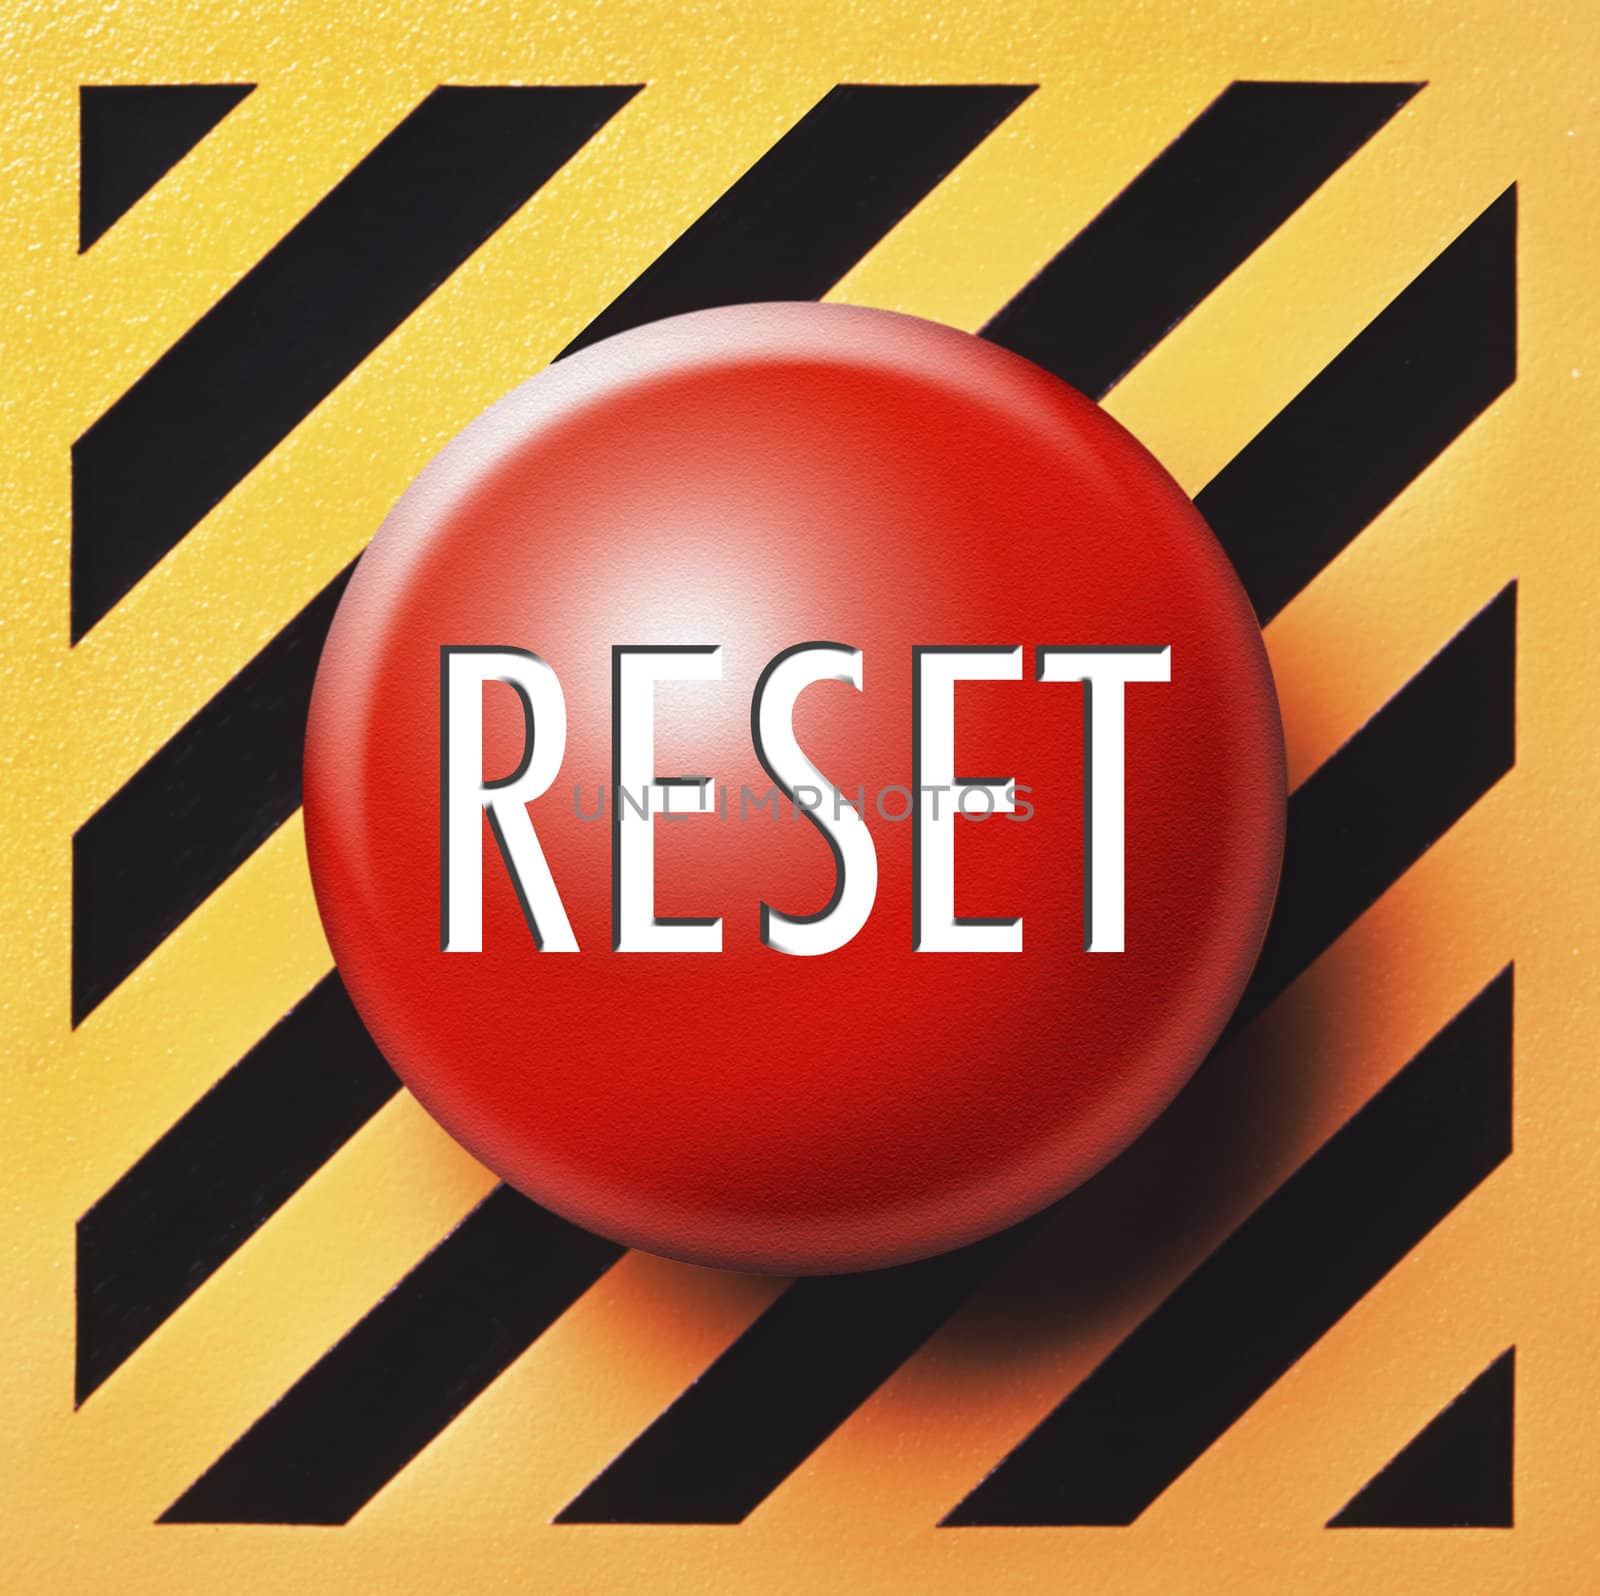 Reset button in red with white type on black and orange background